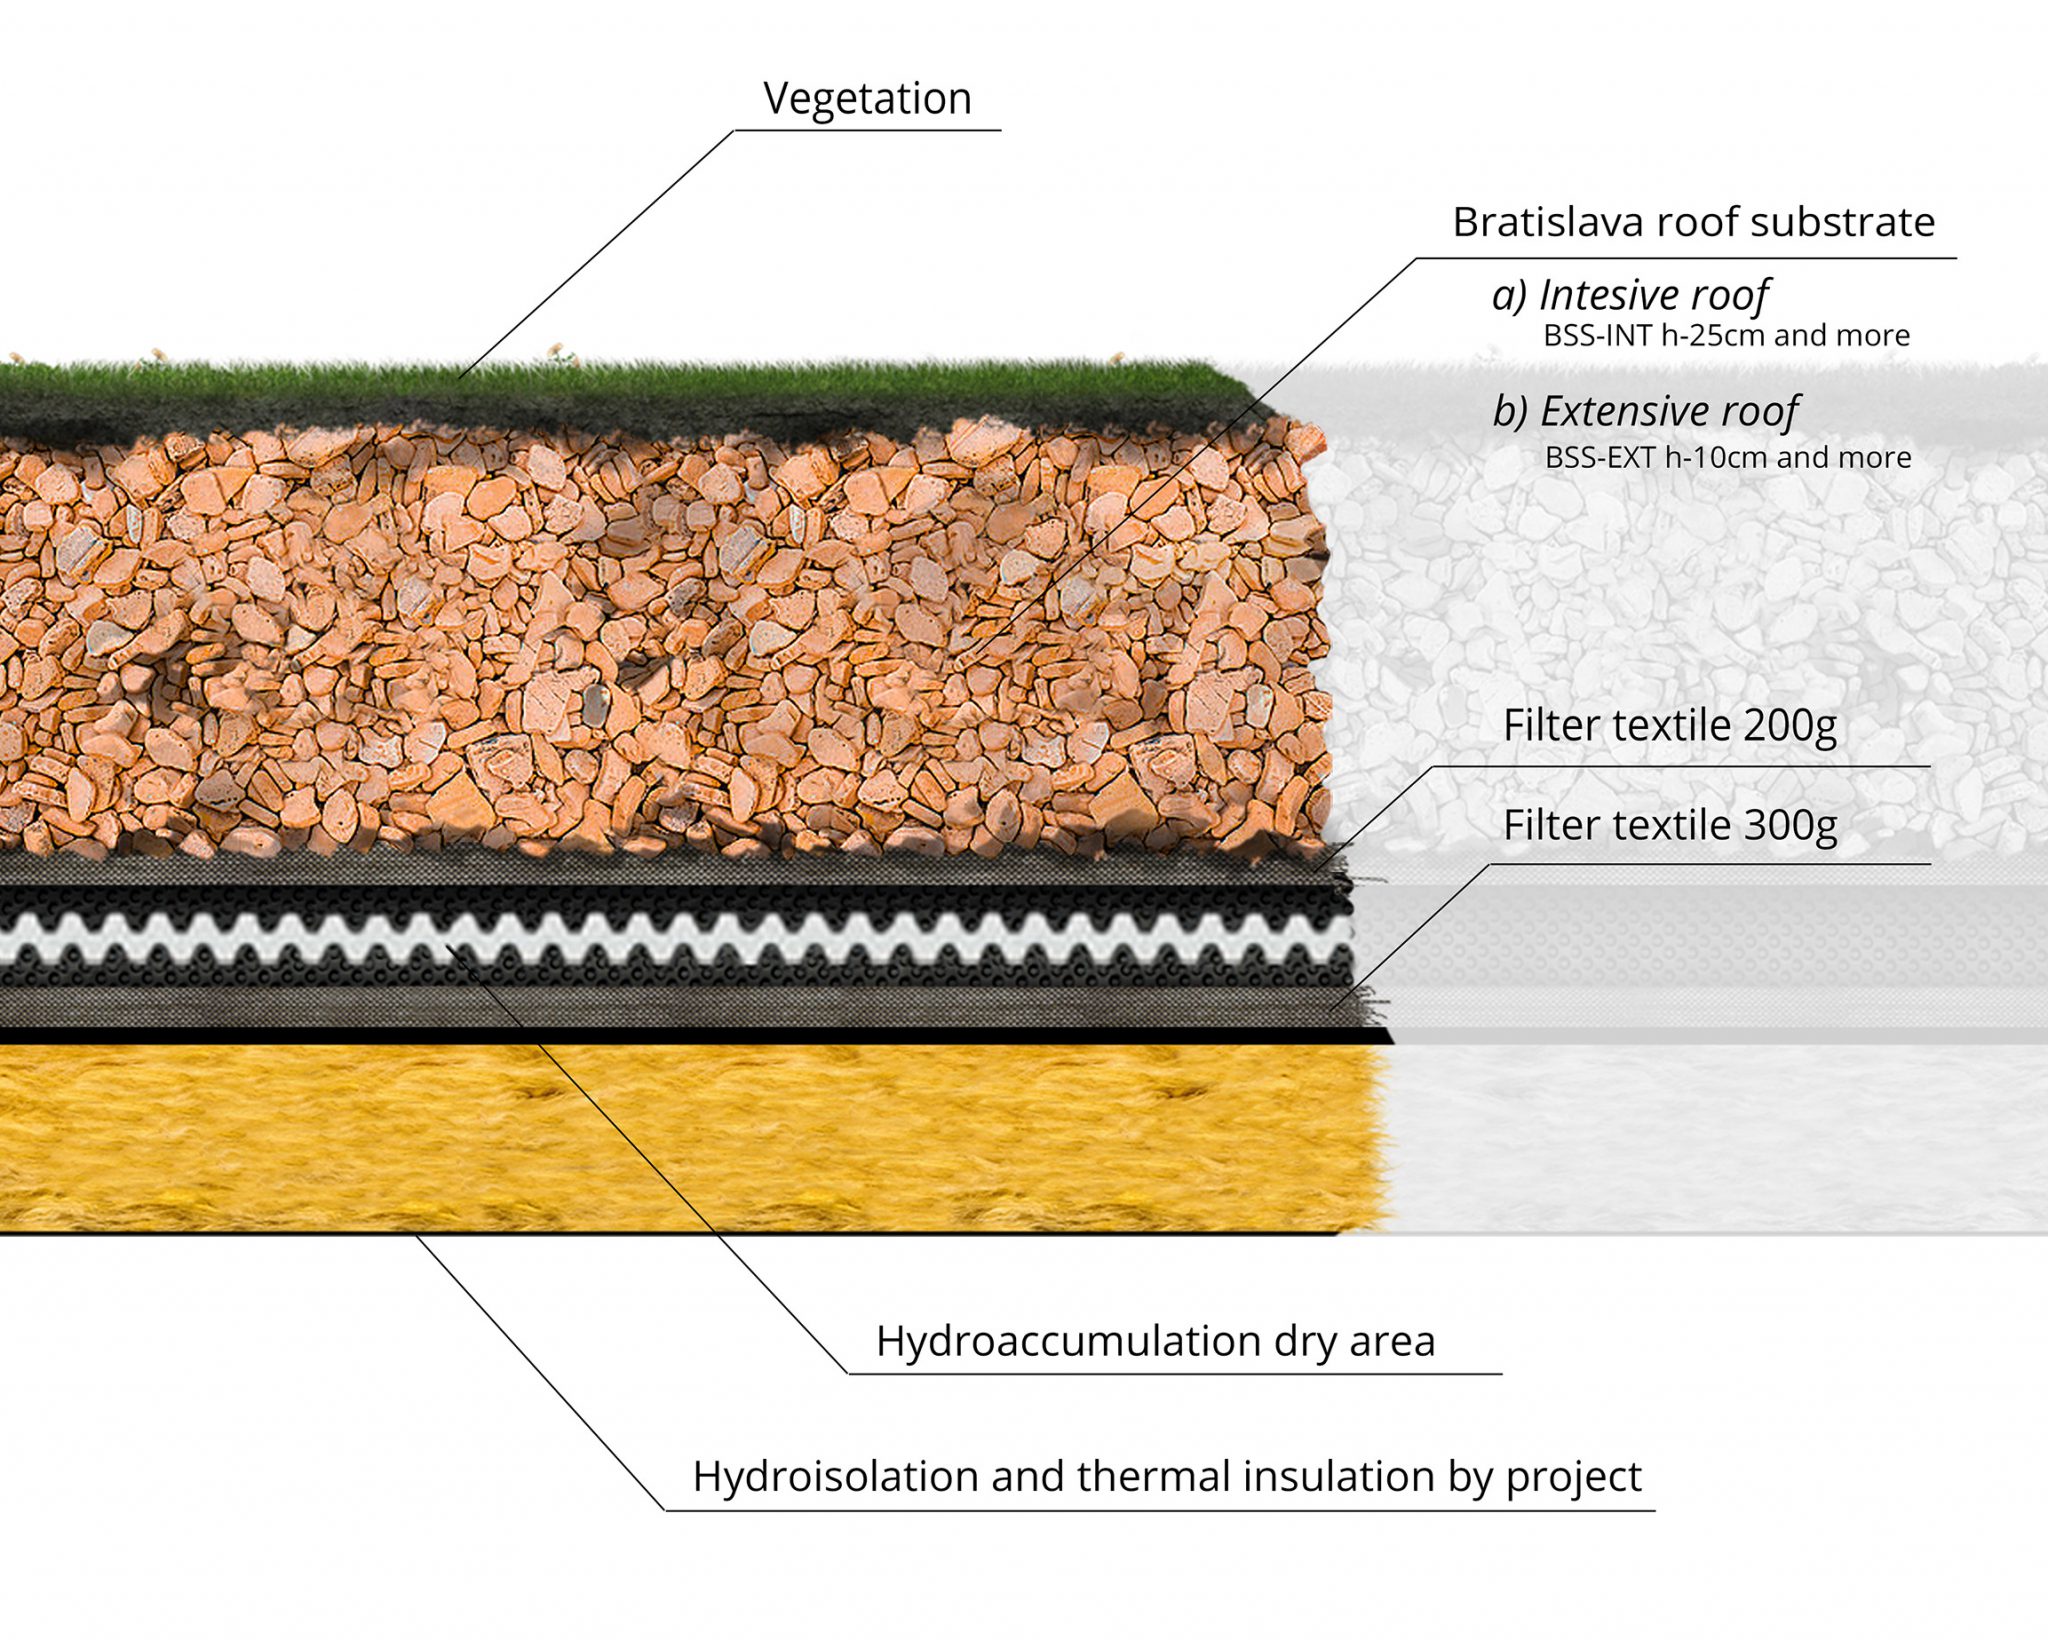 Vegetation | Bratislava roof substrate: a) Intensive roof (BSS-INT h-25cm and more), b) Extensive roof (BSS-EXT h-10cm and more) | Filter textile 200g | Filter textile 300g | Hydroaccumulation dry area, Hydroisolation and thermal insulation by project